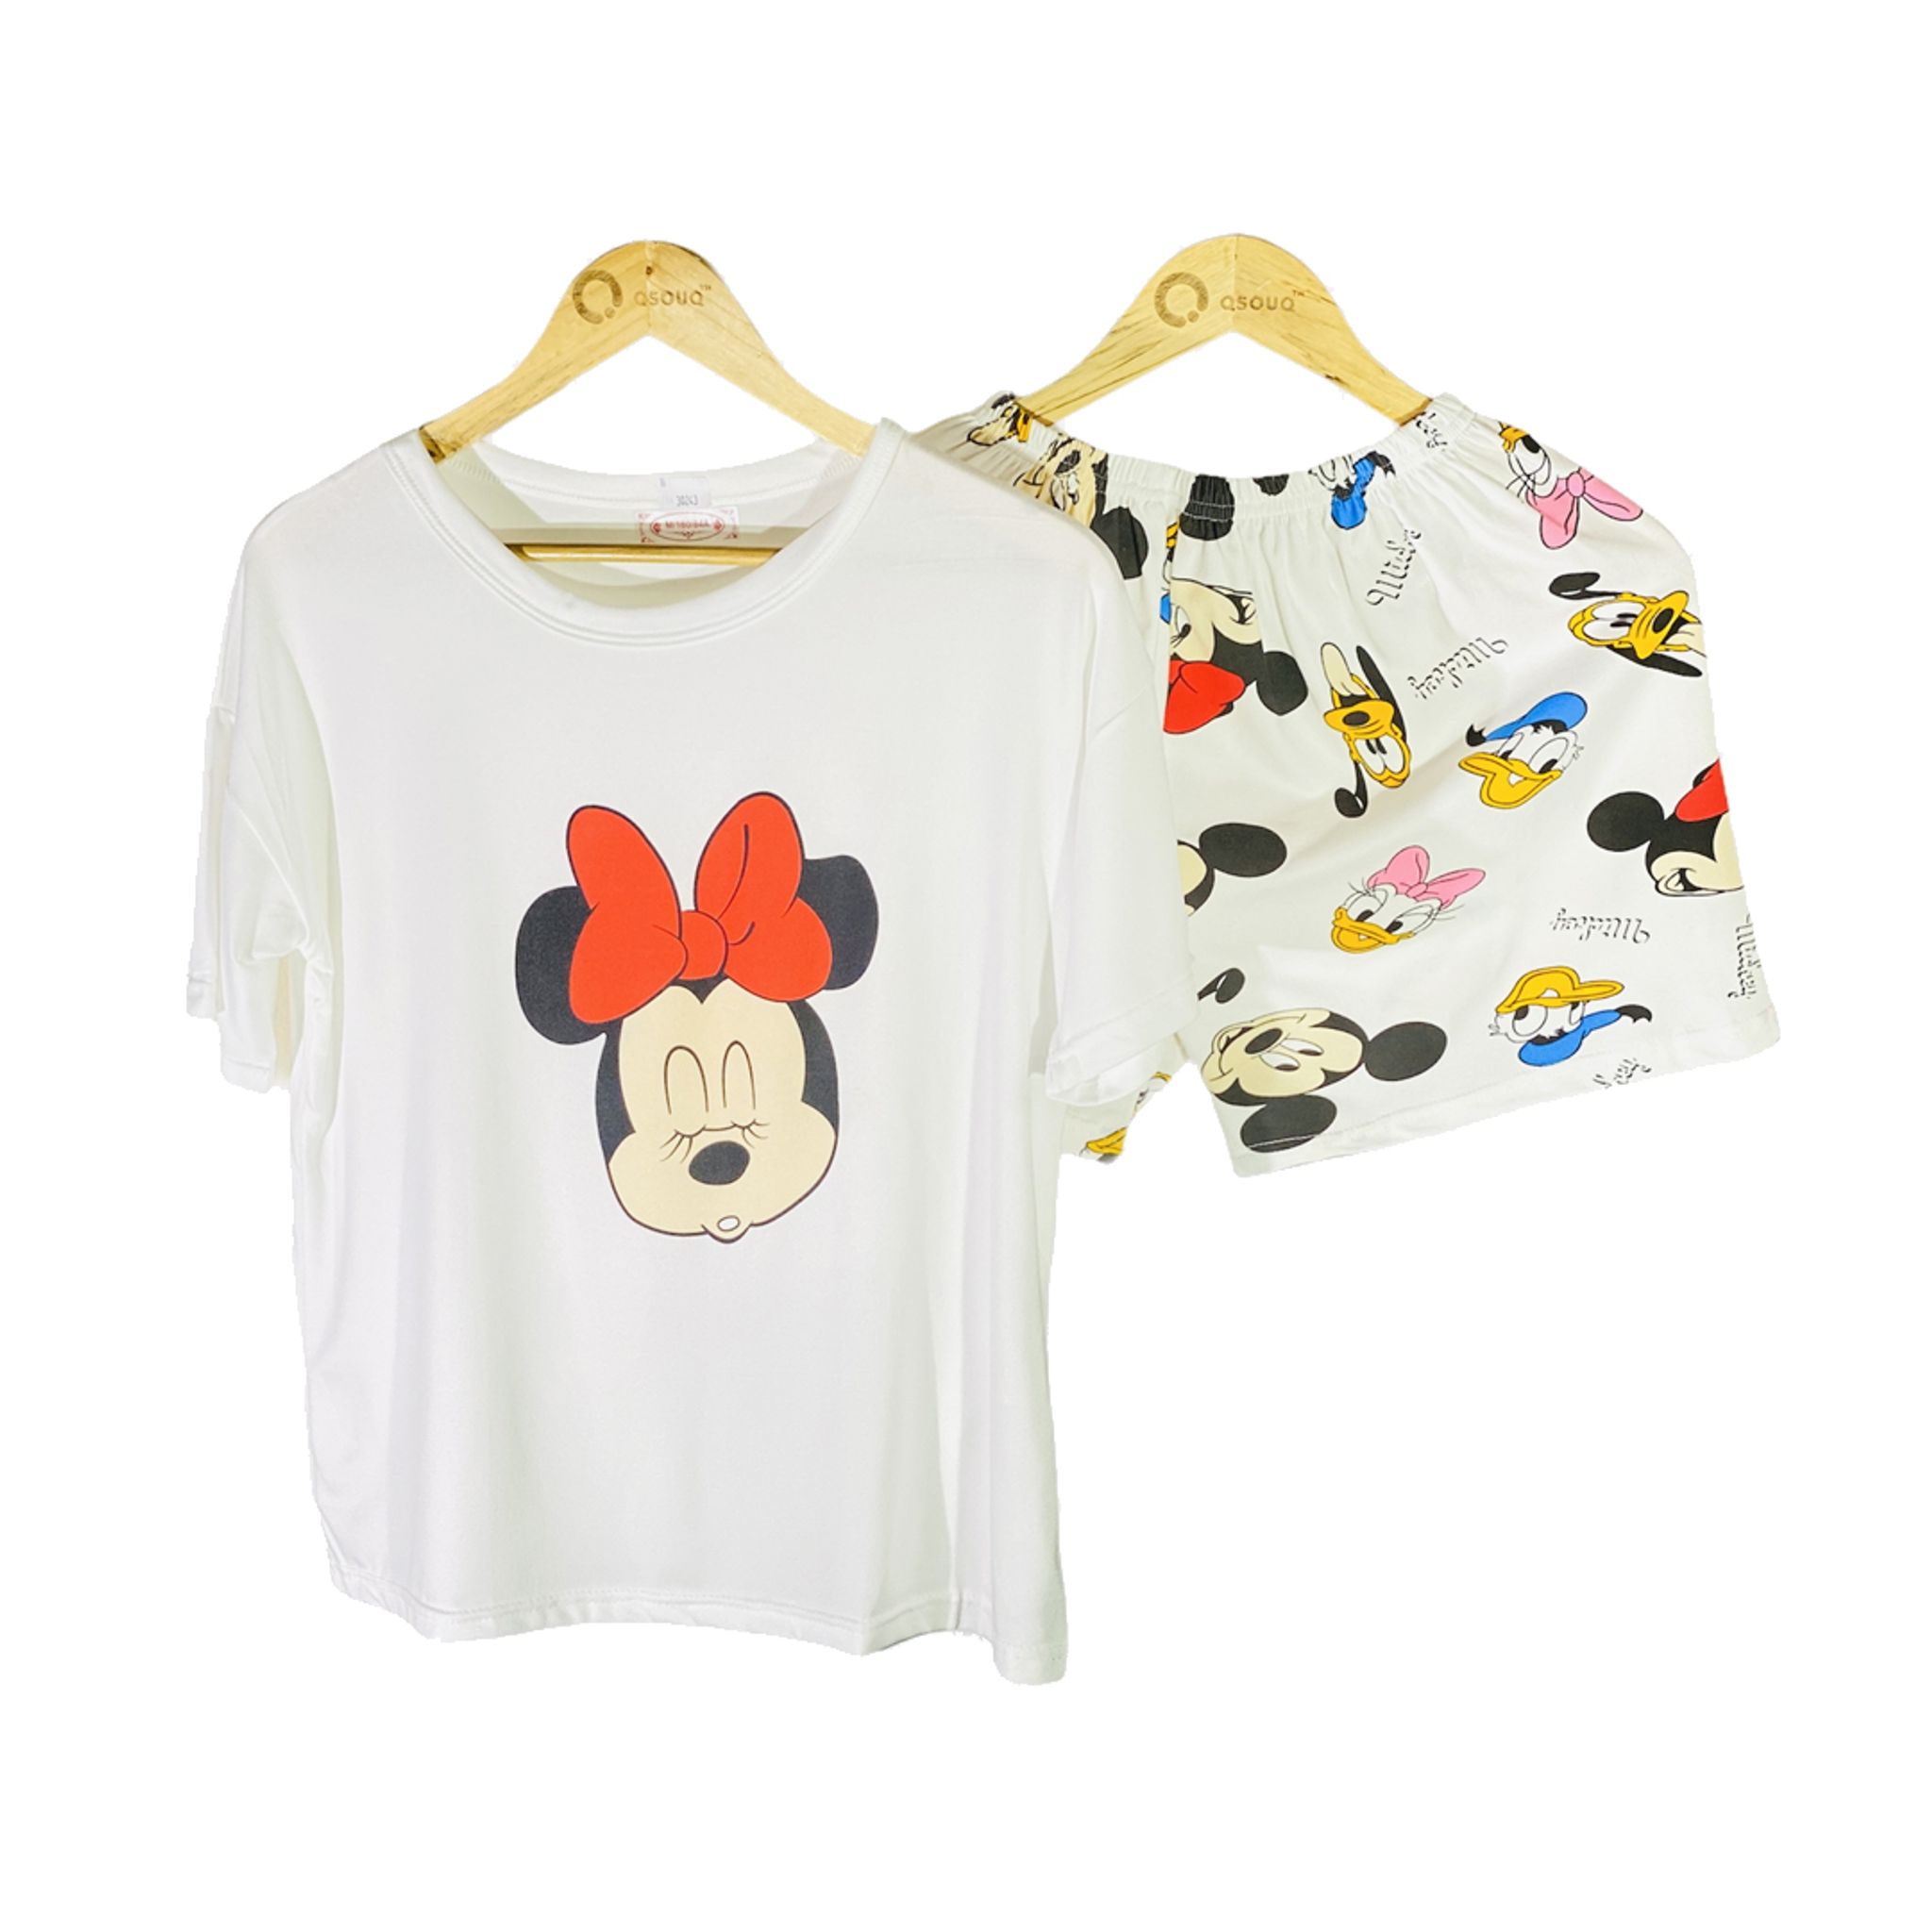 Women's Two Piece Cartoon Printed T-shirt and Shorts Set - 1Sell